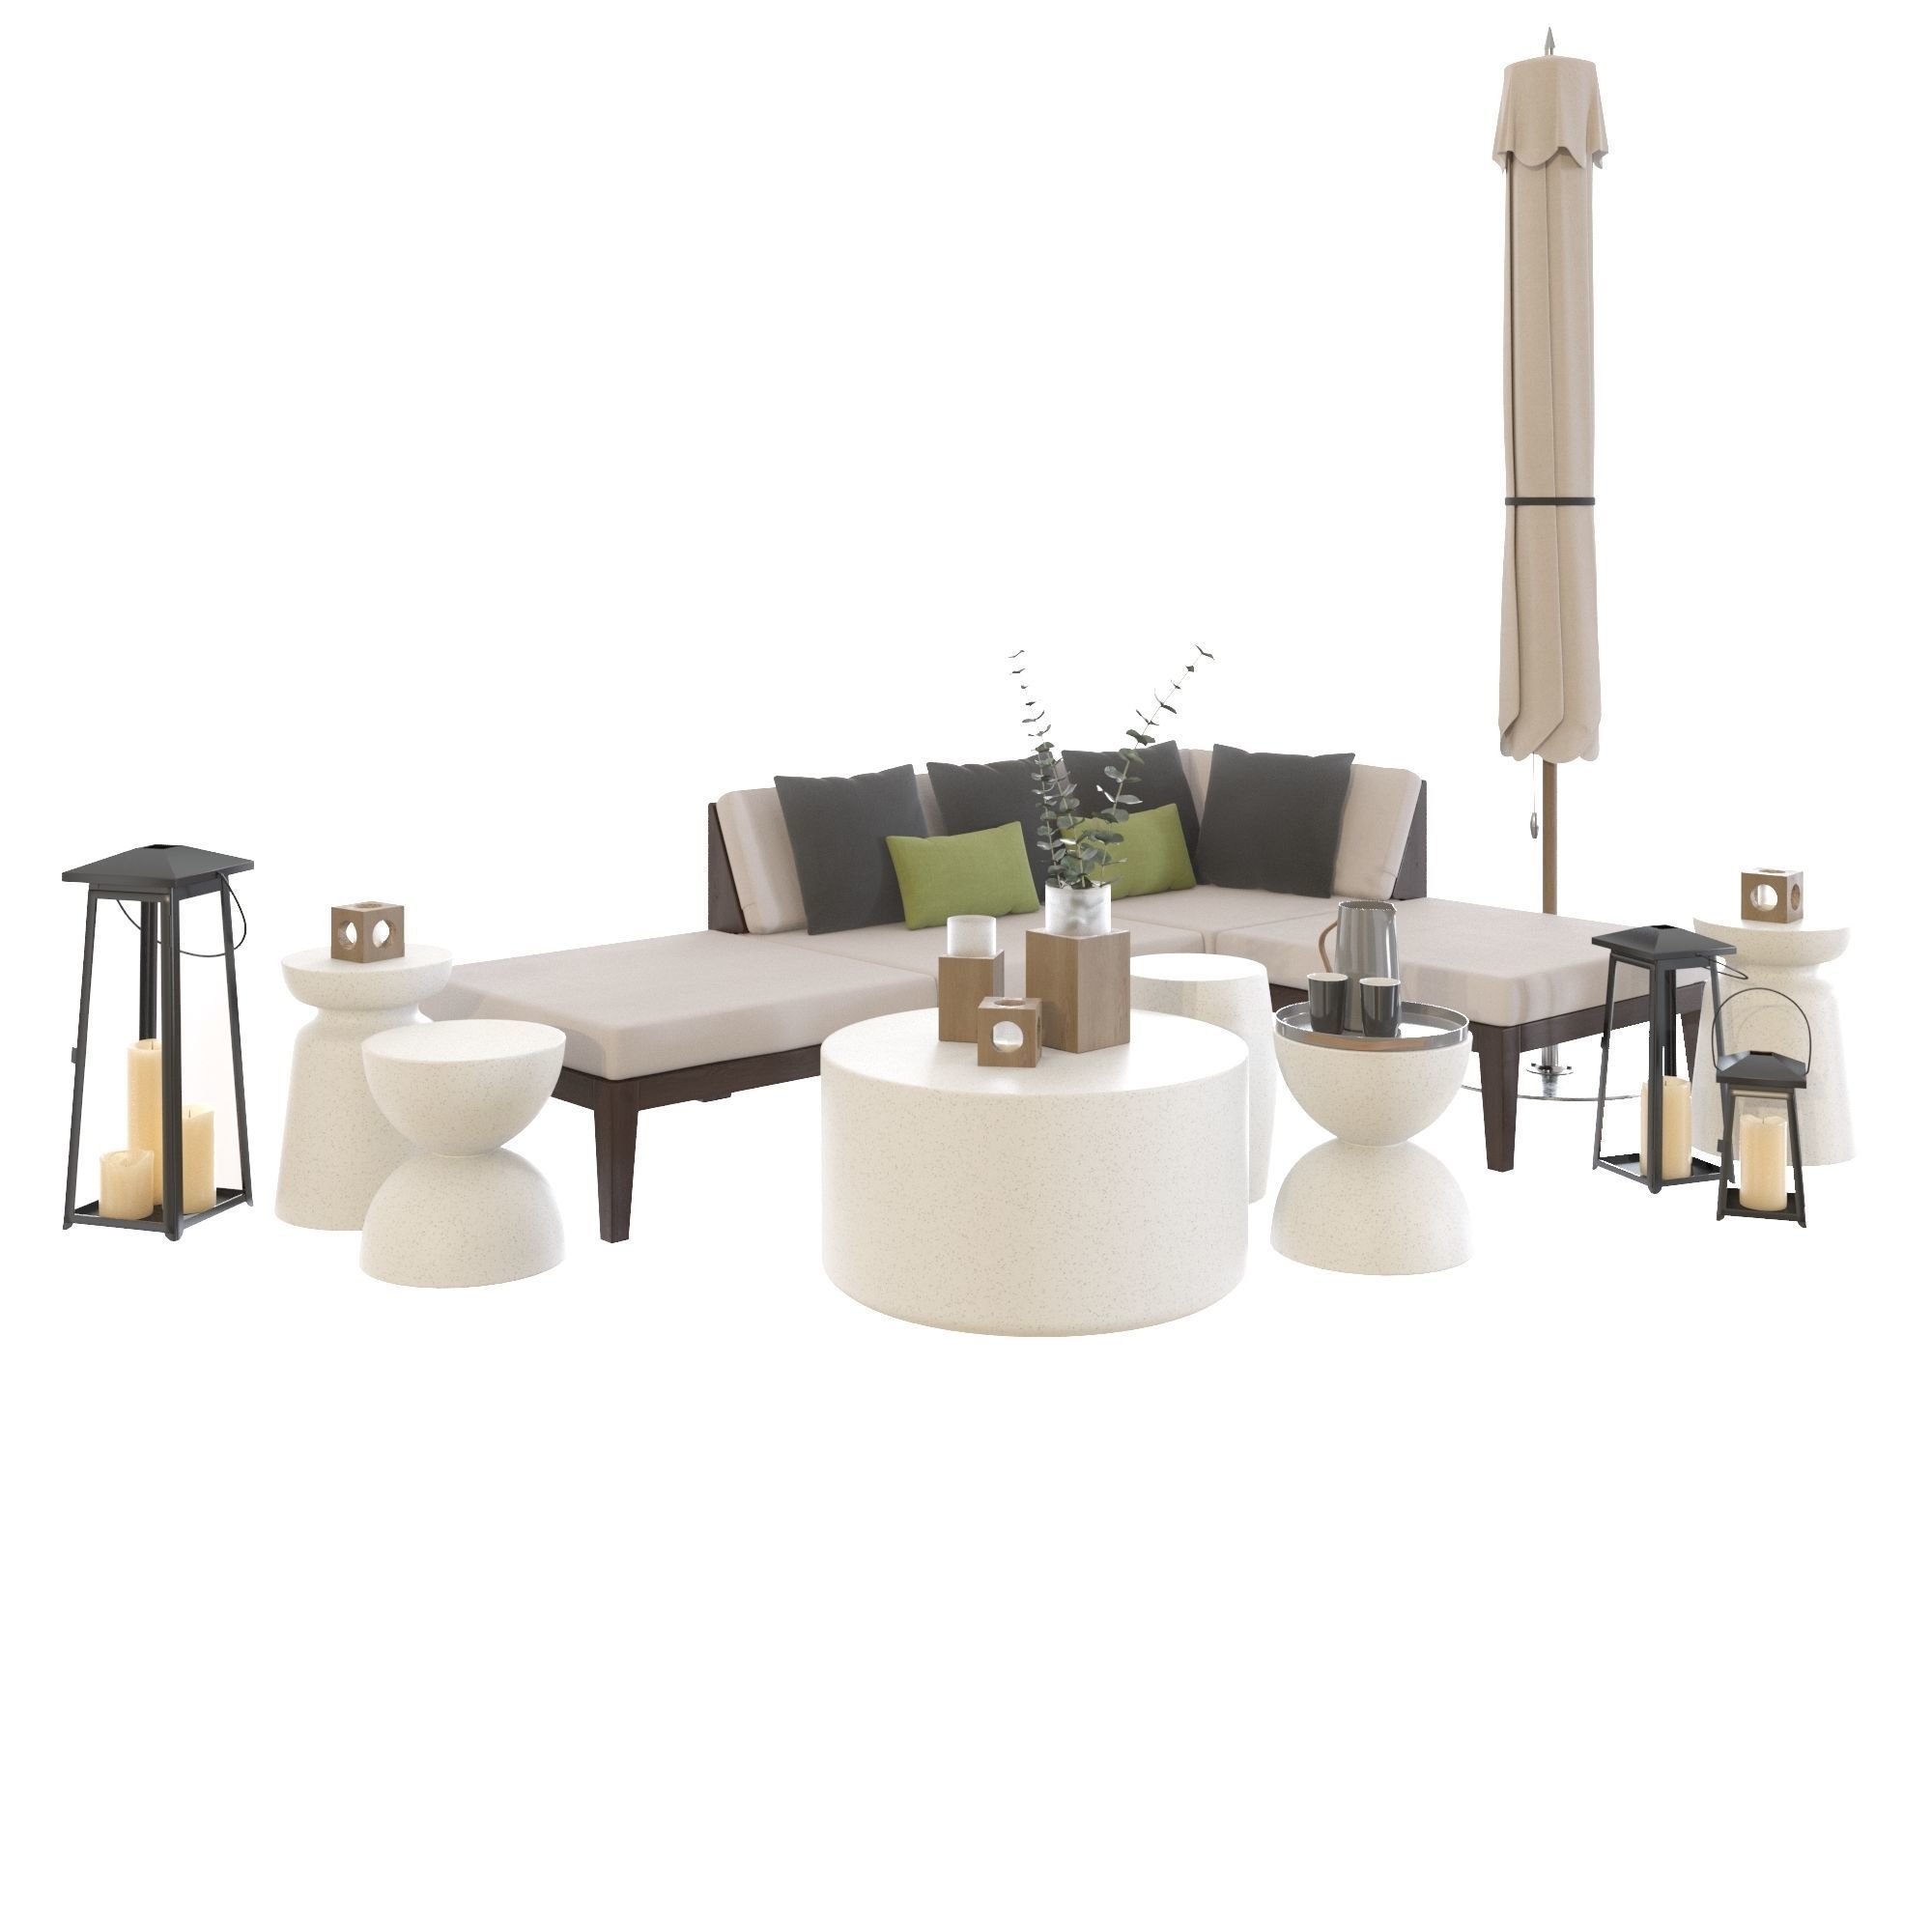 Crate And Barrel Elba Sectional 3d Model | Cgtrader In Elba Ottoman Coffee Tables (View 24 of 30)